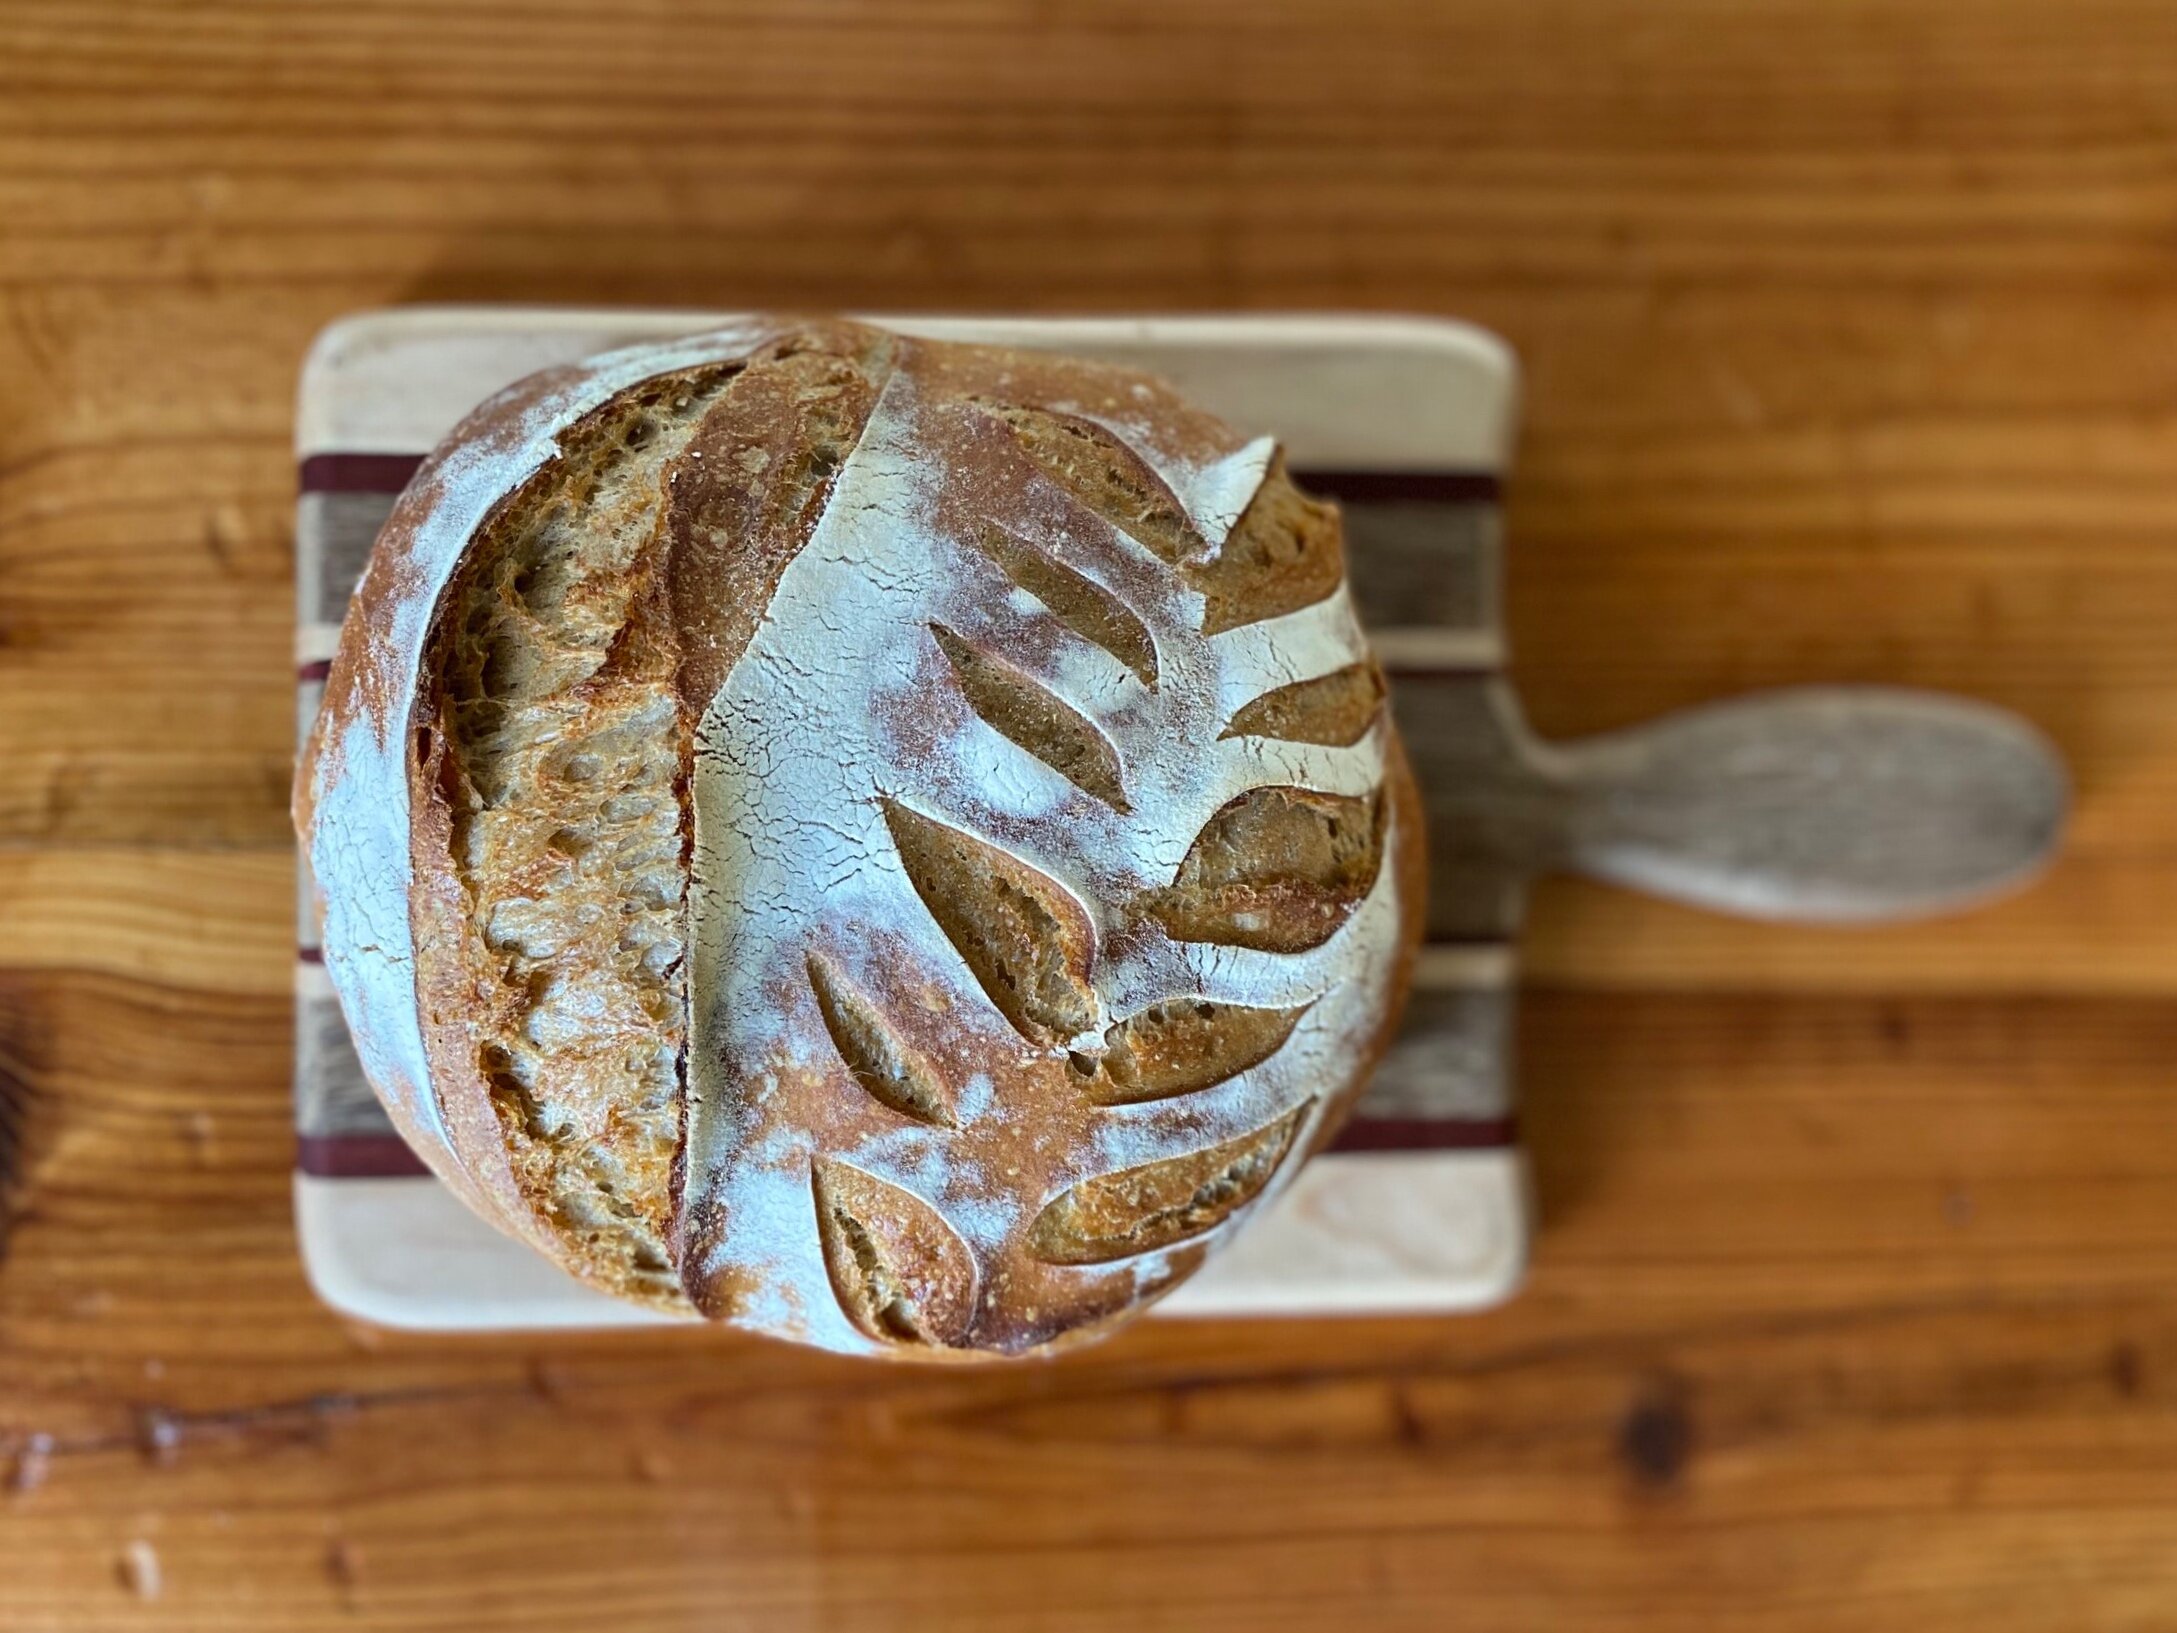 Our Favourite and Essential Sourdough Tools - The Baked Collective